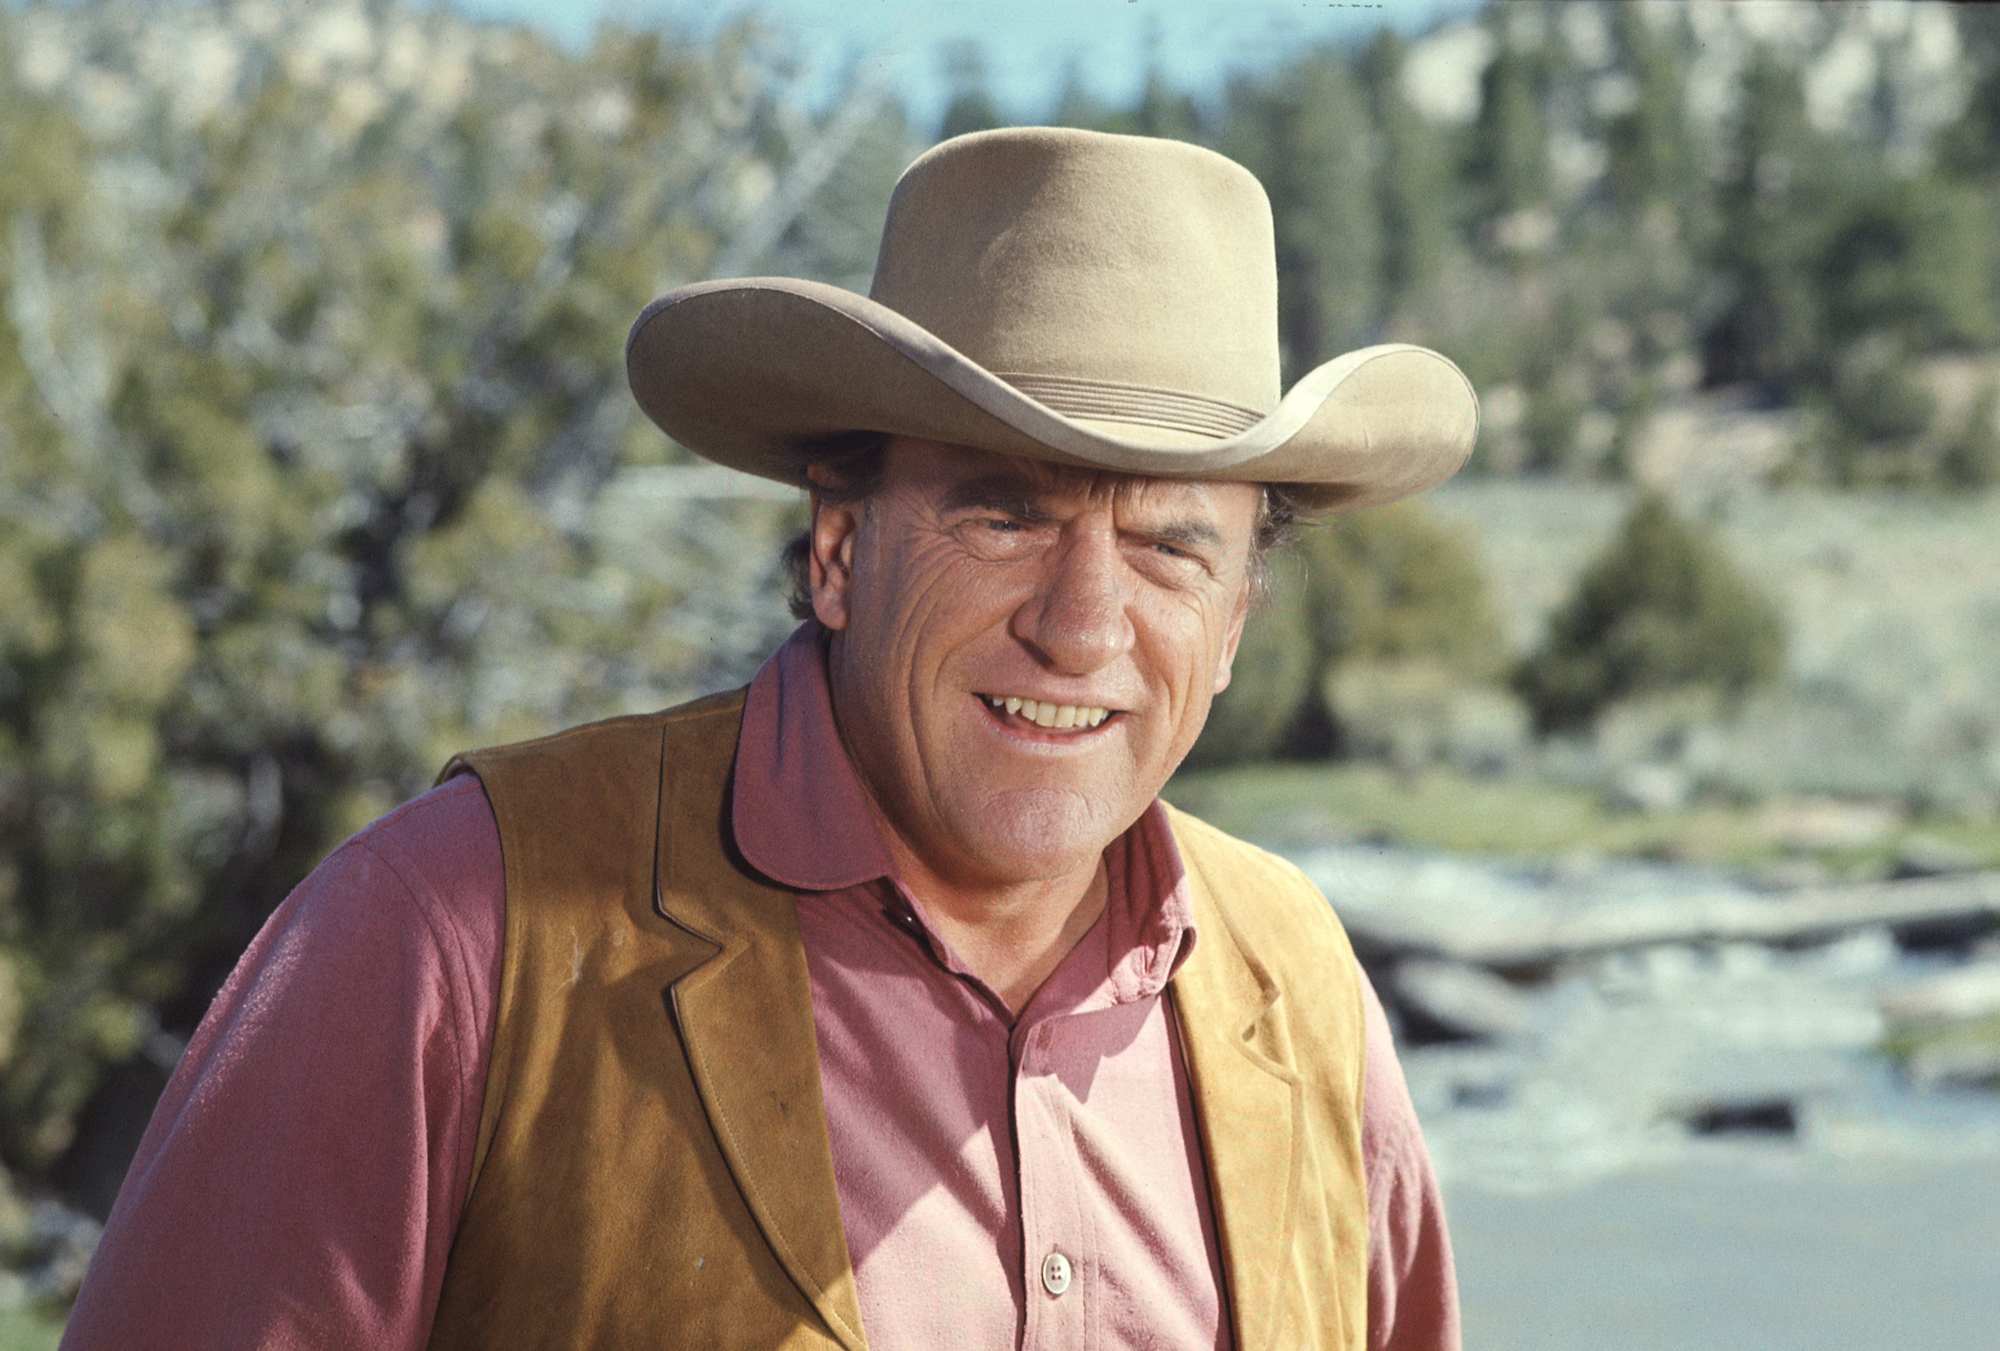 James Arness as Marshal Matt Dillon smiling in front of a blurred background, dressed in western gear